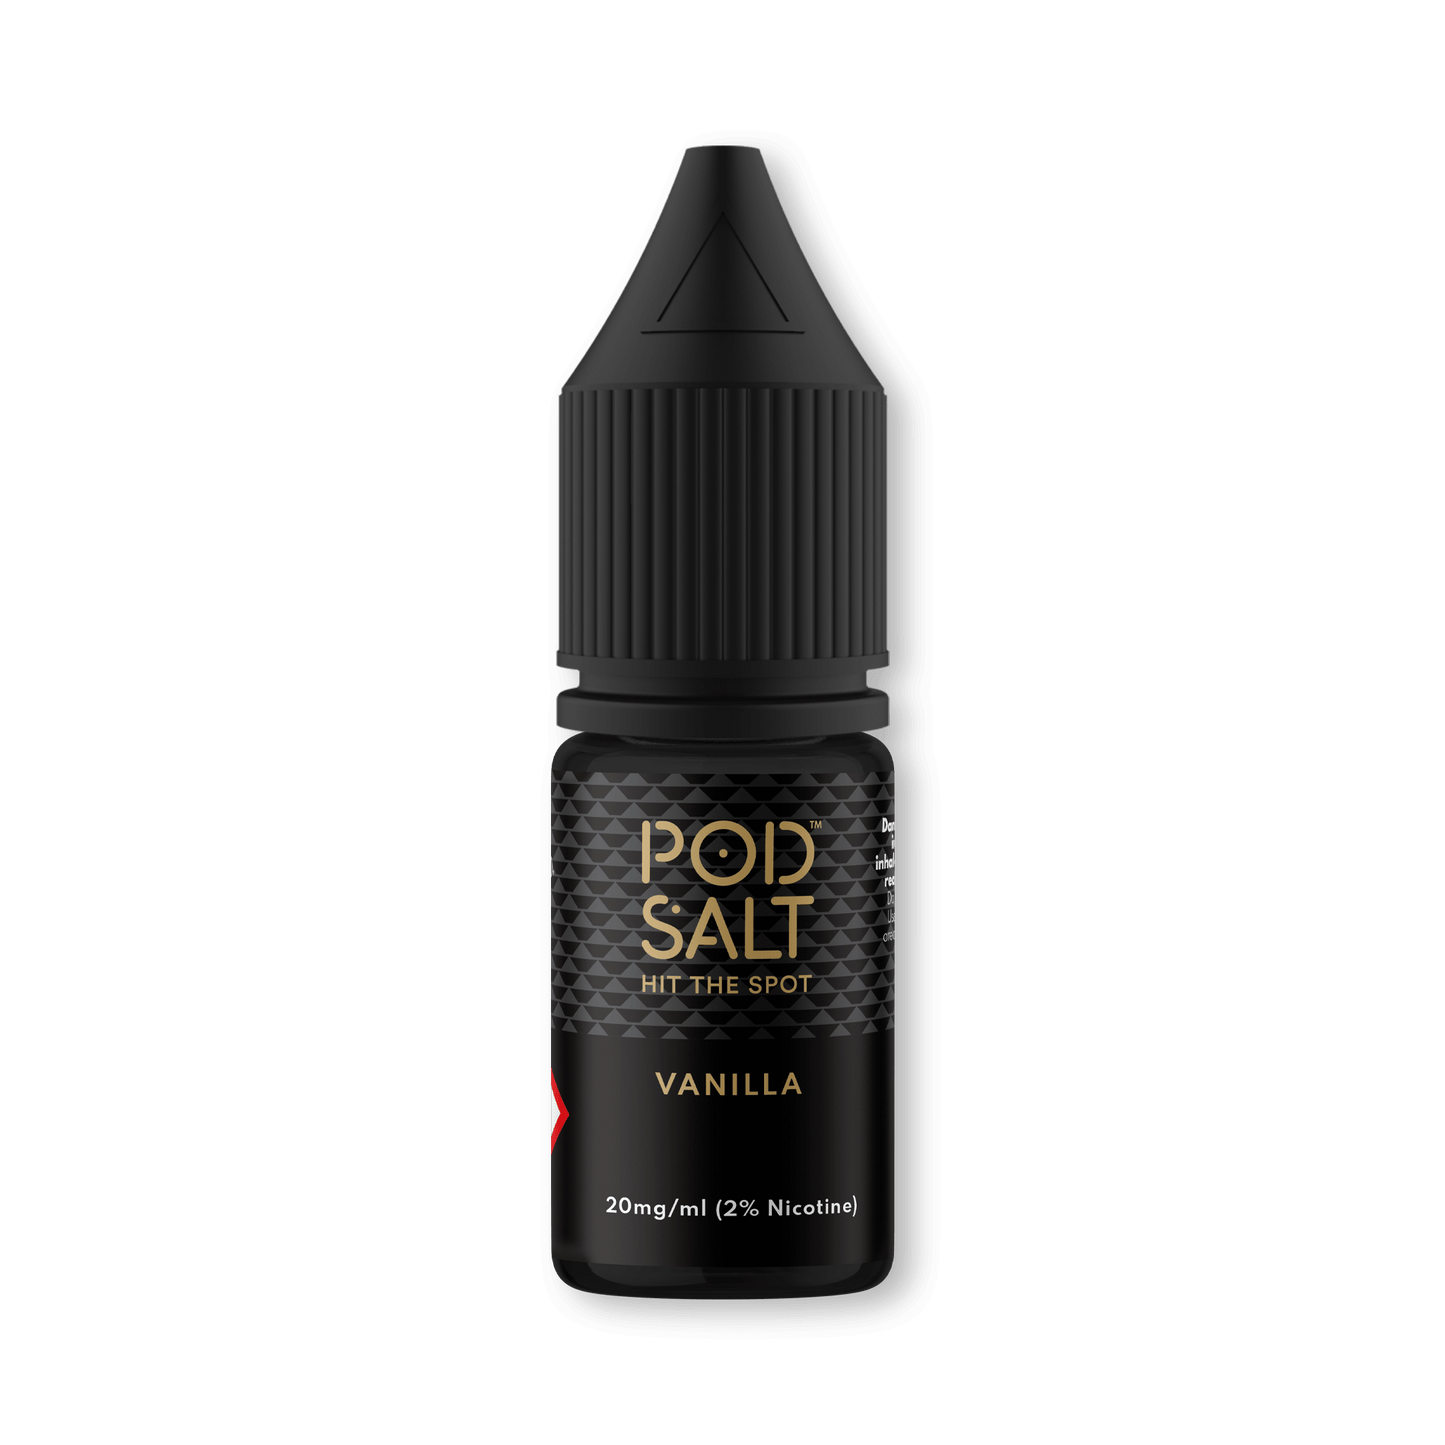 sweetness and creaminess vaping delight timeless vanilla cream flavor expertly blended award-winning Nicotine Salts formula ICONA VAPE exclusive Shop now Flavour profile: Vanilla 10ml bottle size 50VG/50PG ratio Made in the UK TPD Compliant